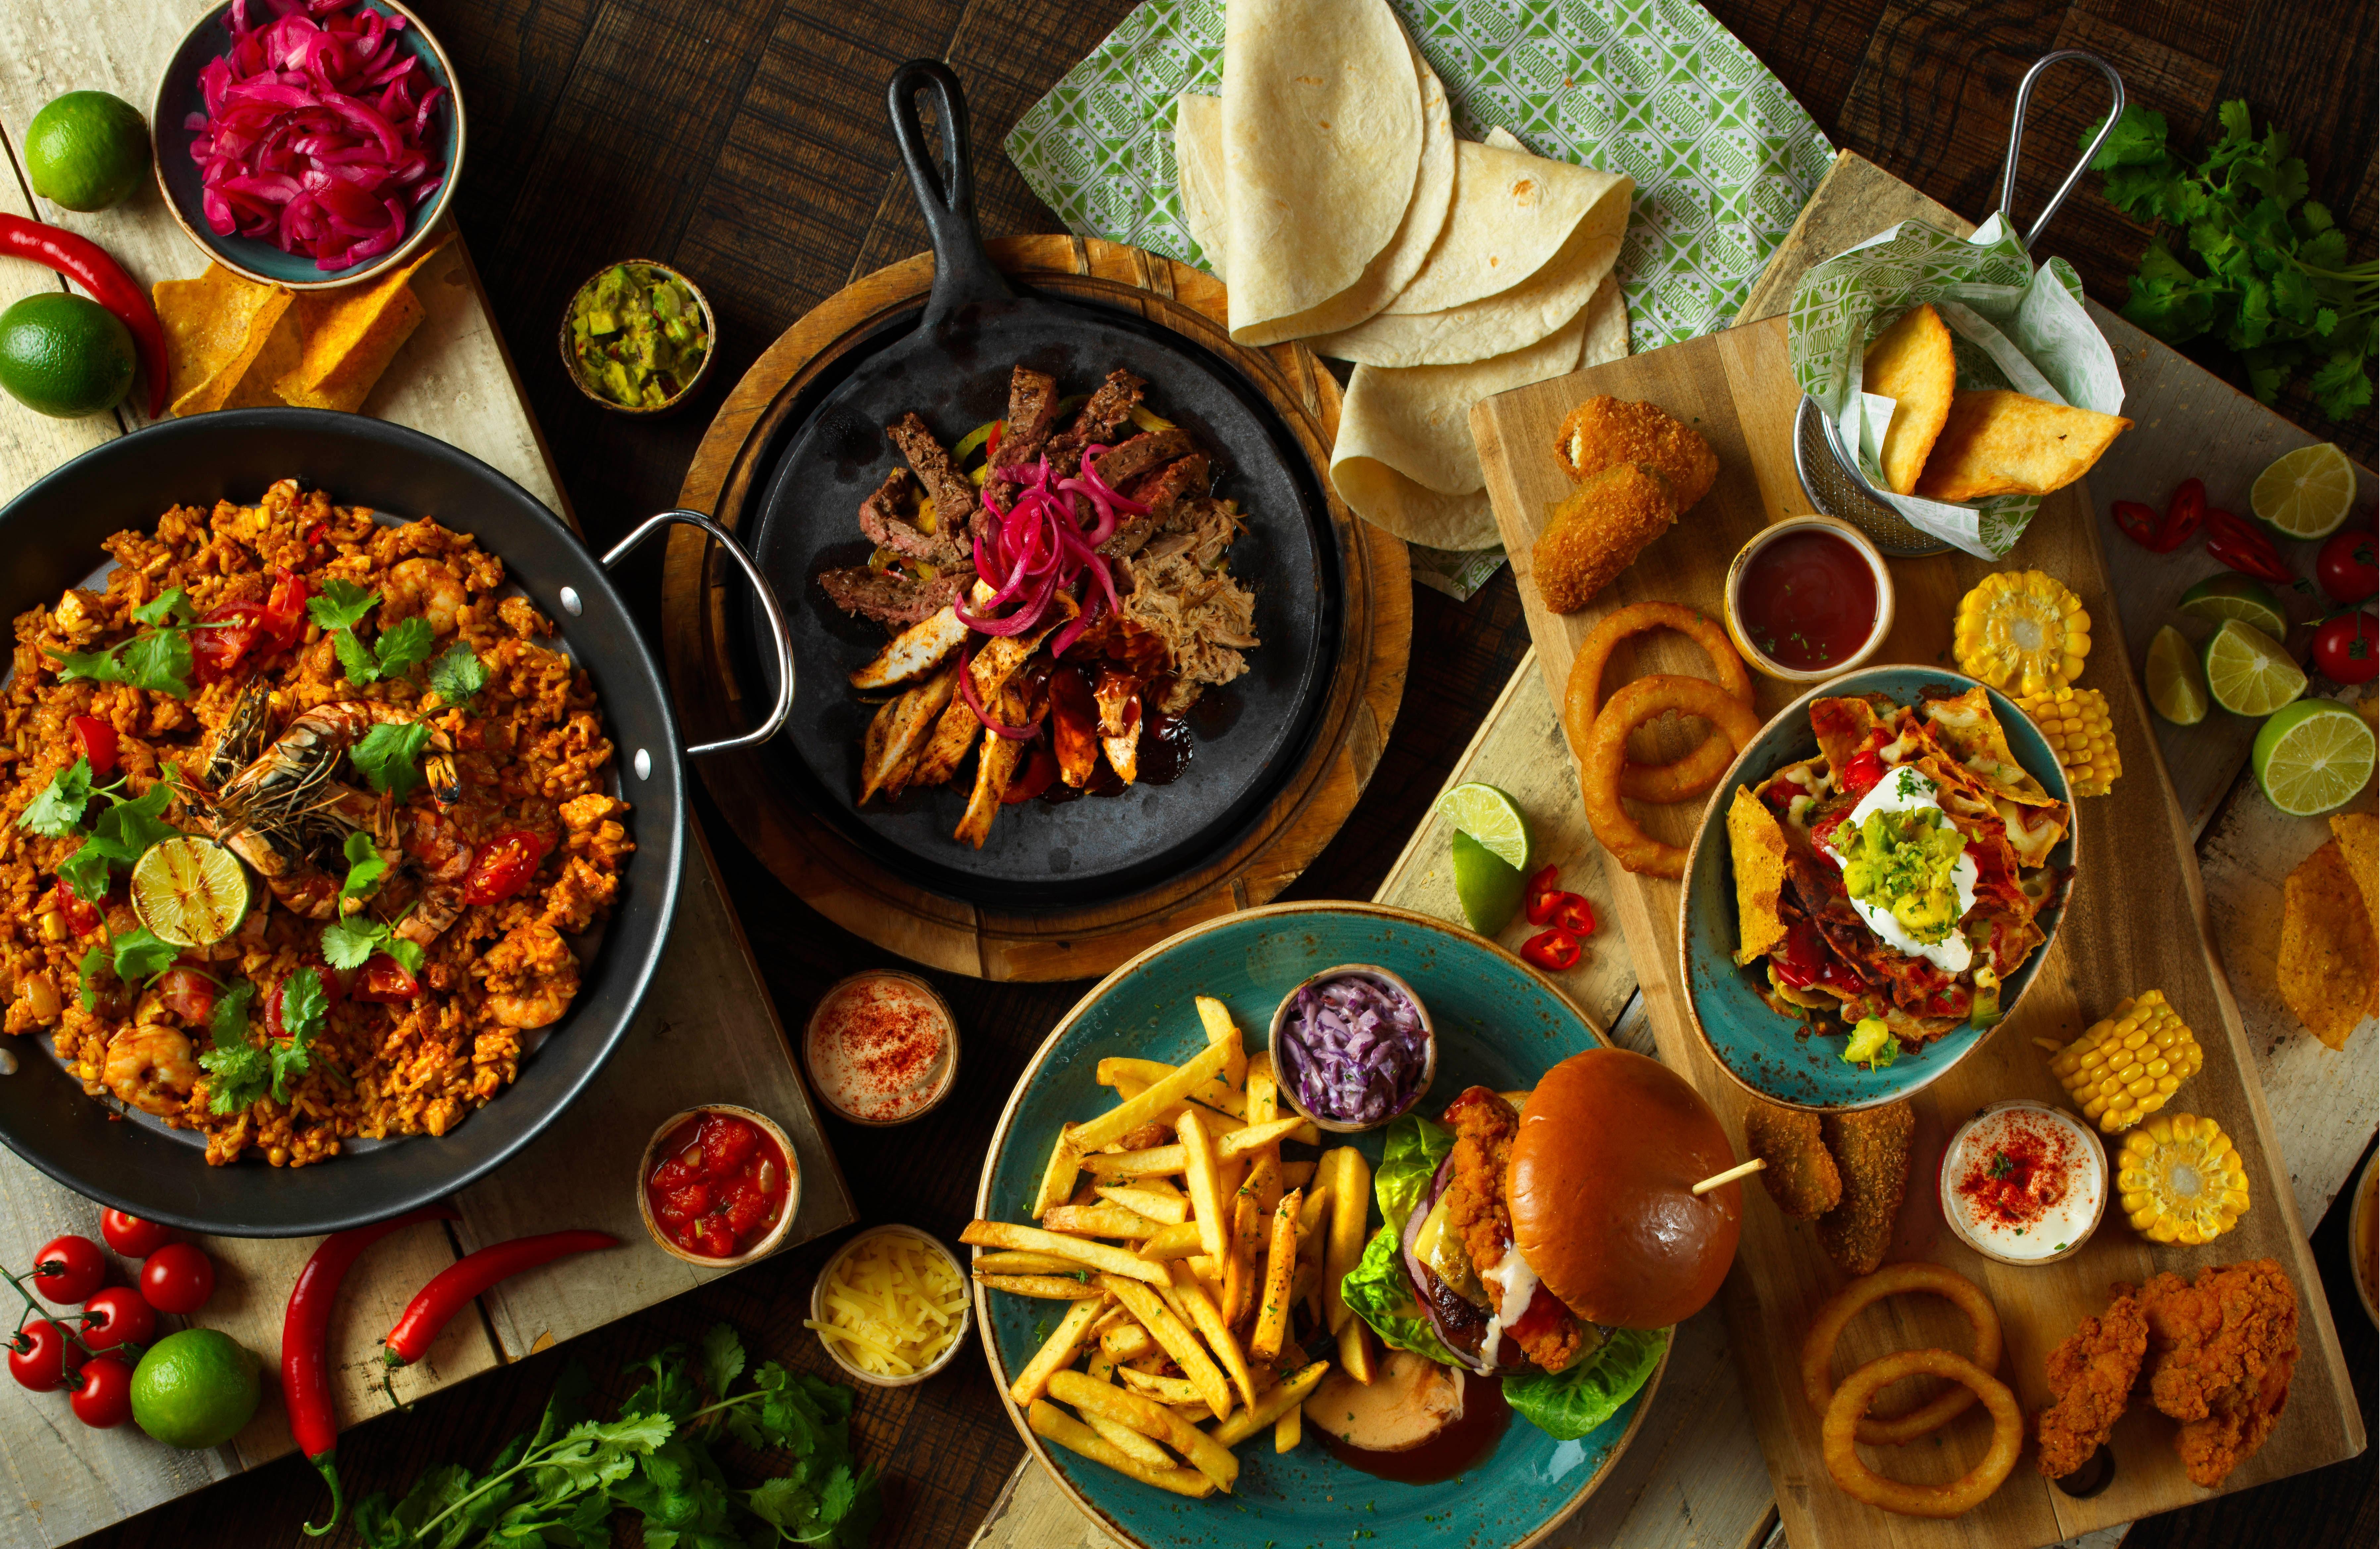 Chiquito Restaurant Bar & Mexican Grill Chiquito Newcastle-Upon-Tyne 01912 612346